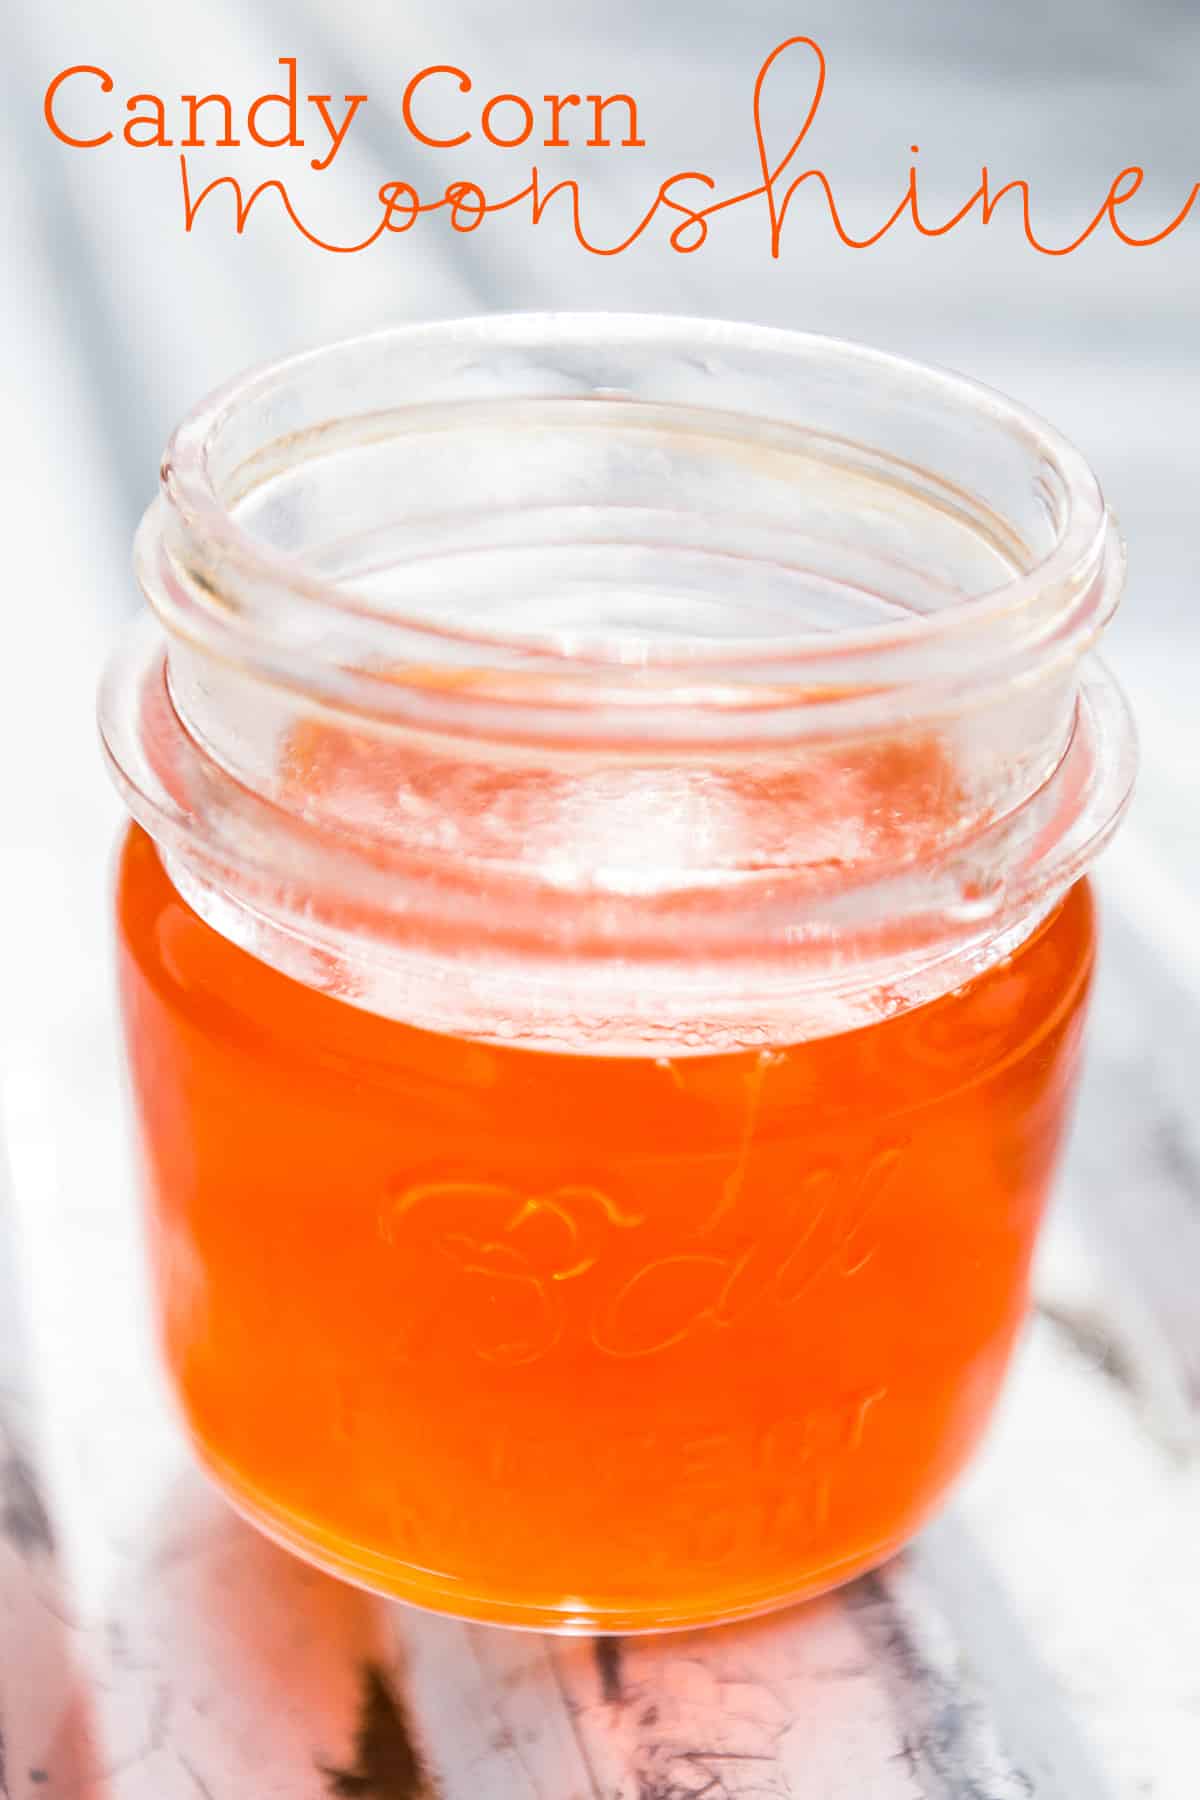 Candy corn moonshine- the most delicious halloween drink or gift!